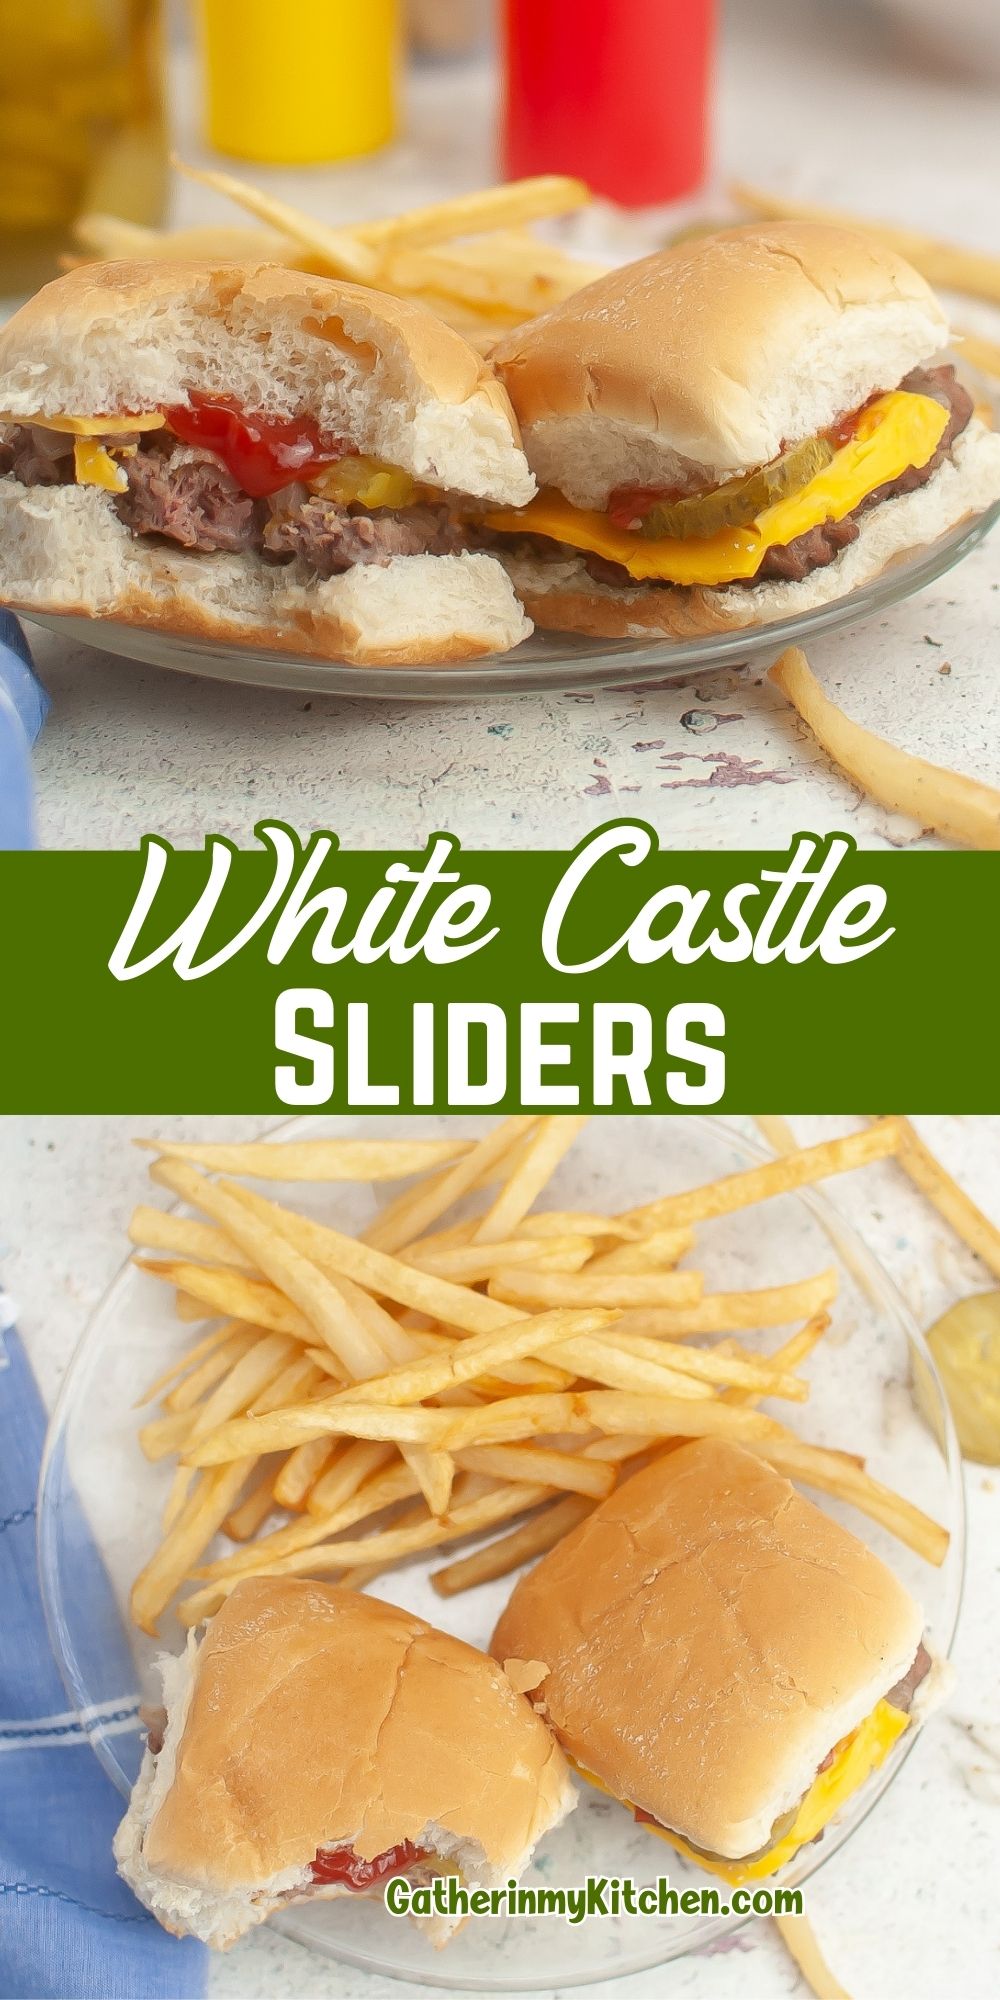 Pin image: top and bottom copycat White Castle Slider images and middle says "White Castle Sliders".